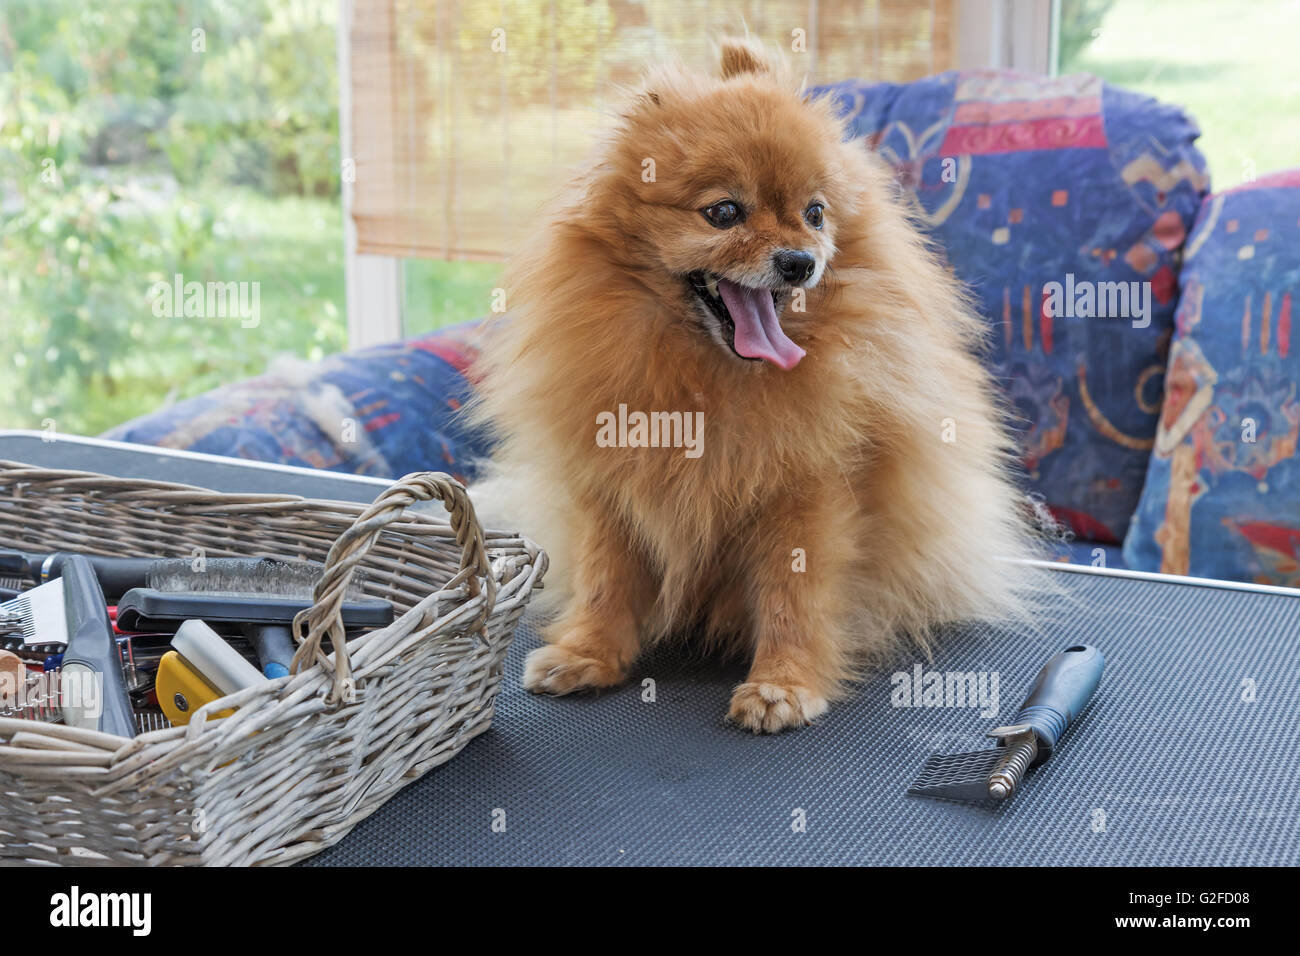 Alone Pomeranian German Spitz dog is standing on the grooming table. Stock Photo